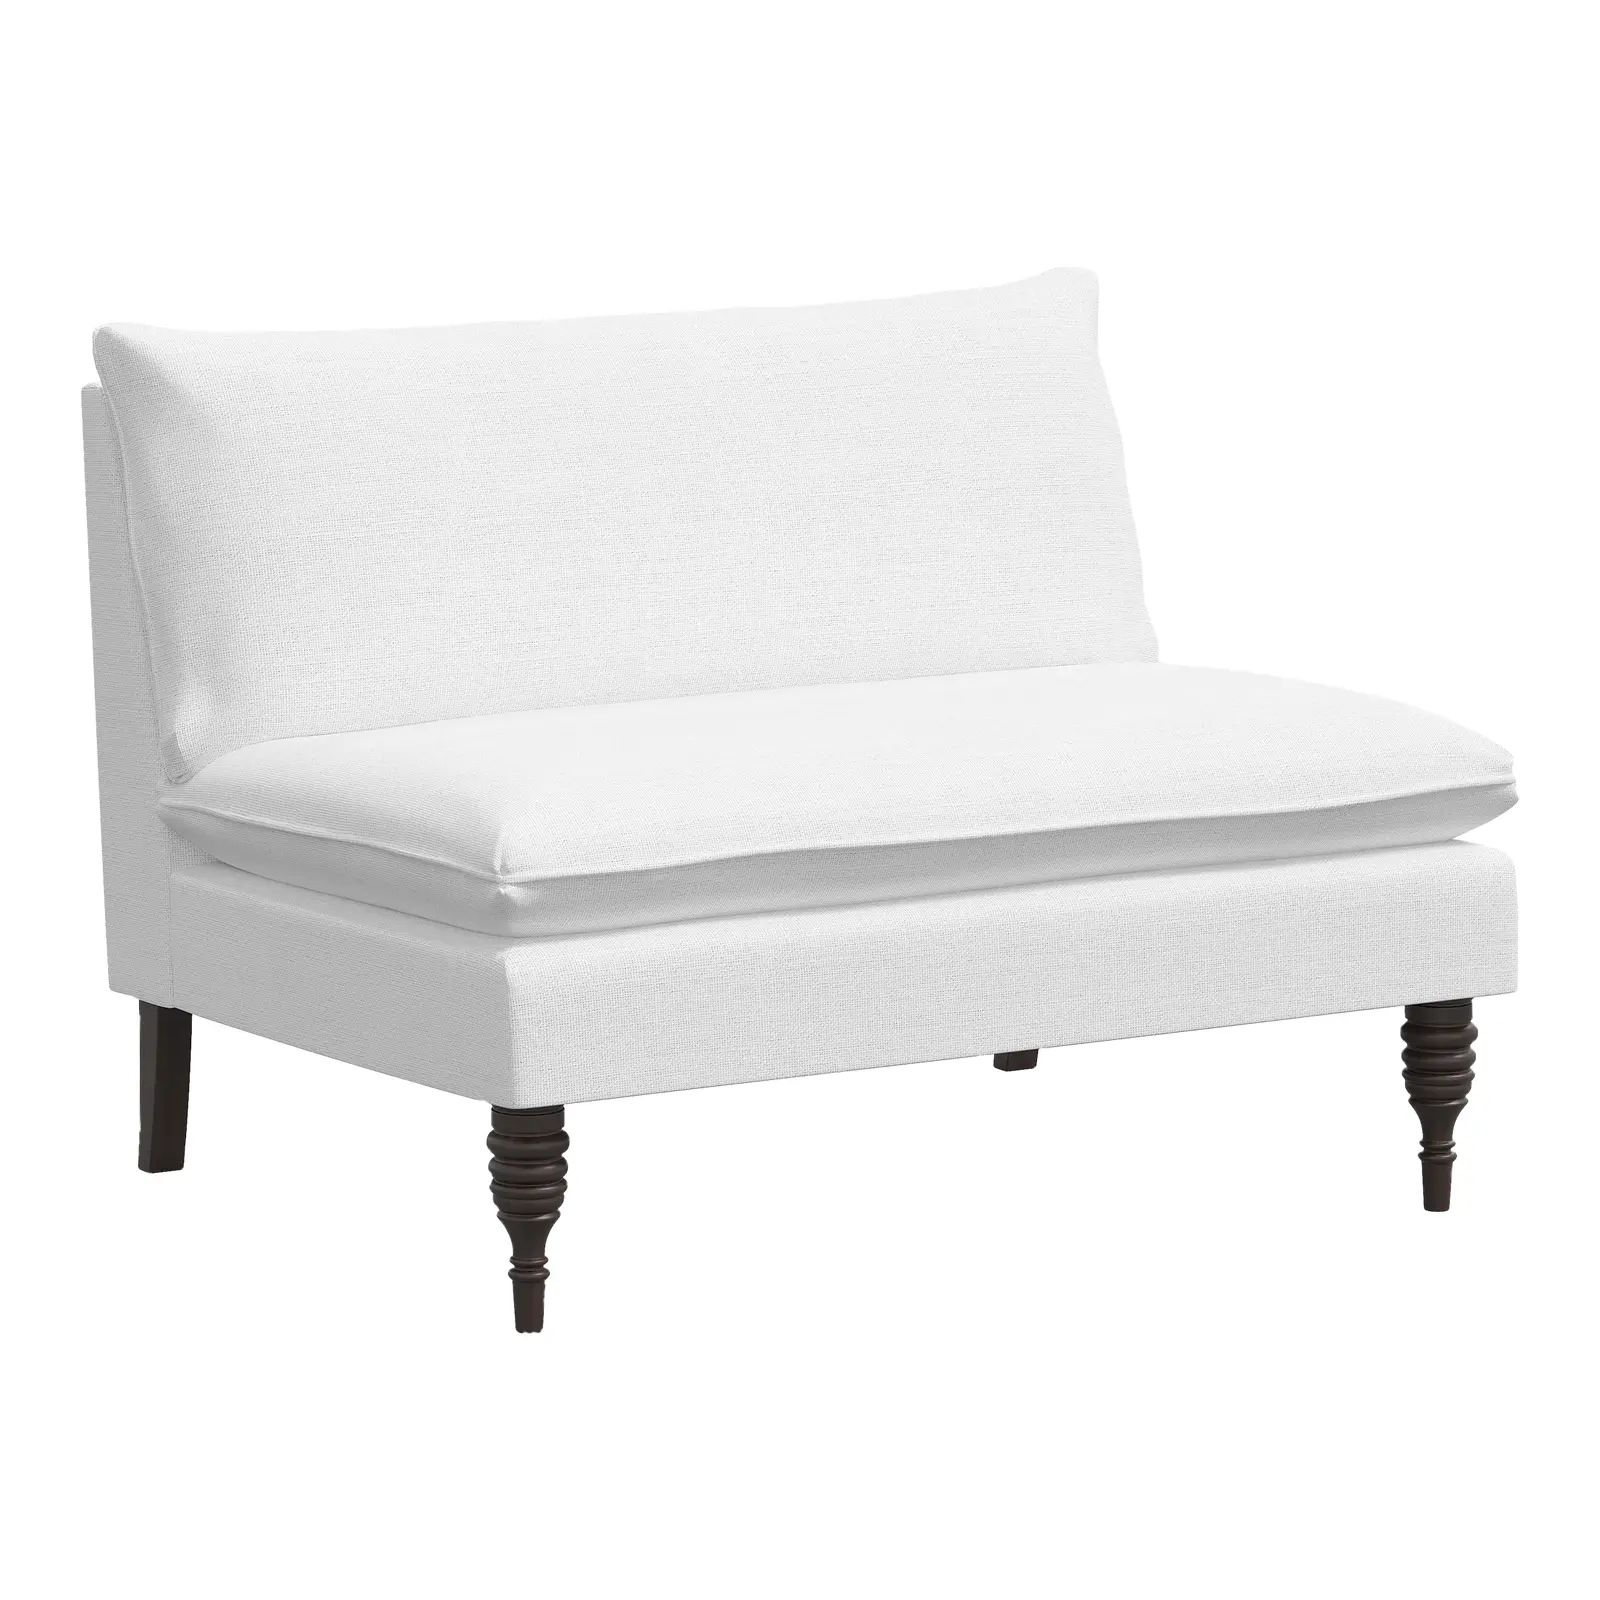 Red from Scalamandre crafted by Cloth & Company Concord Settee, White Solid Linen | Chairish